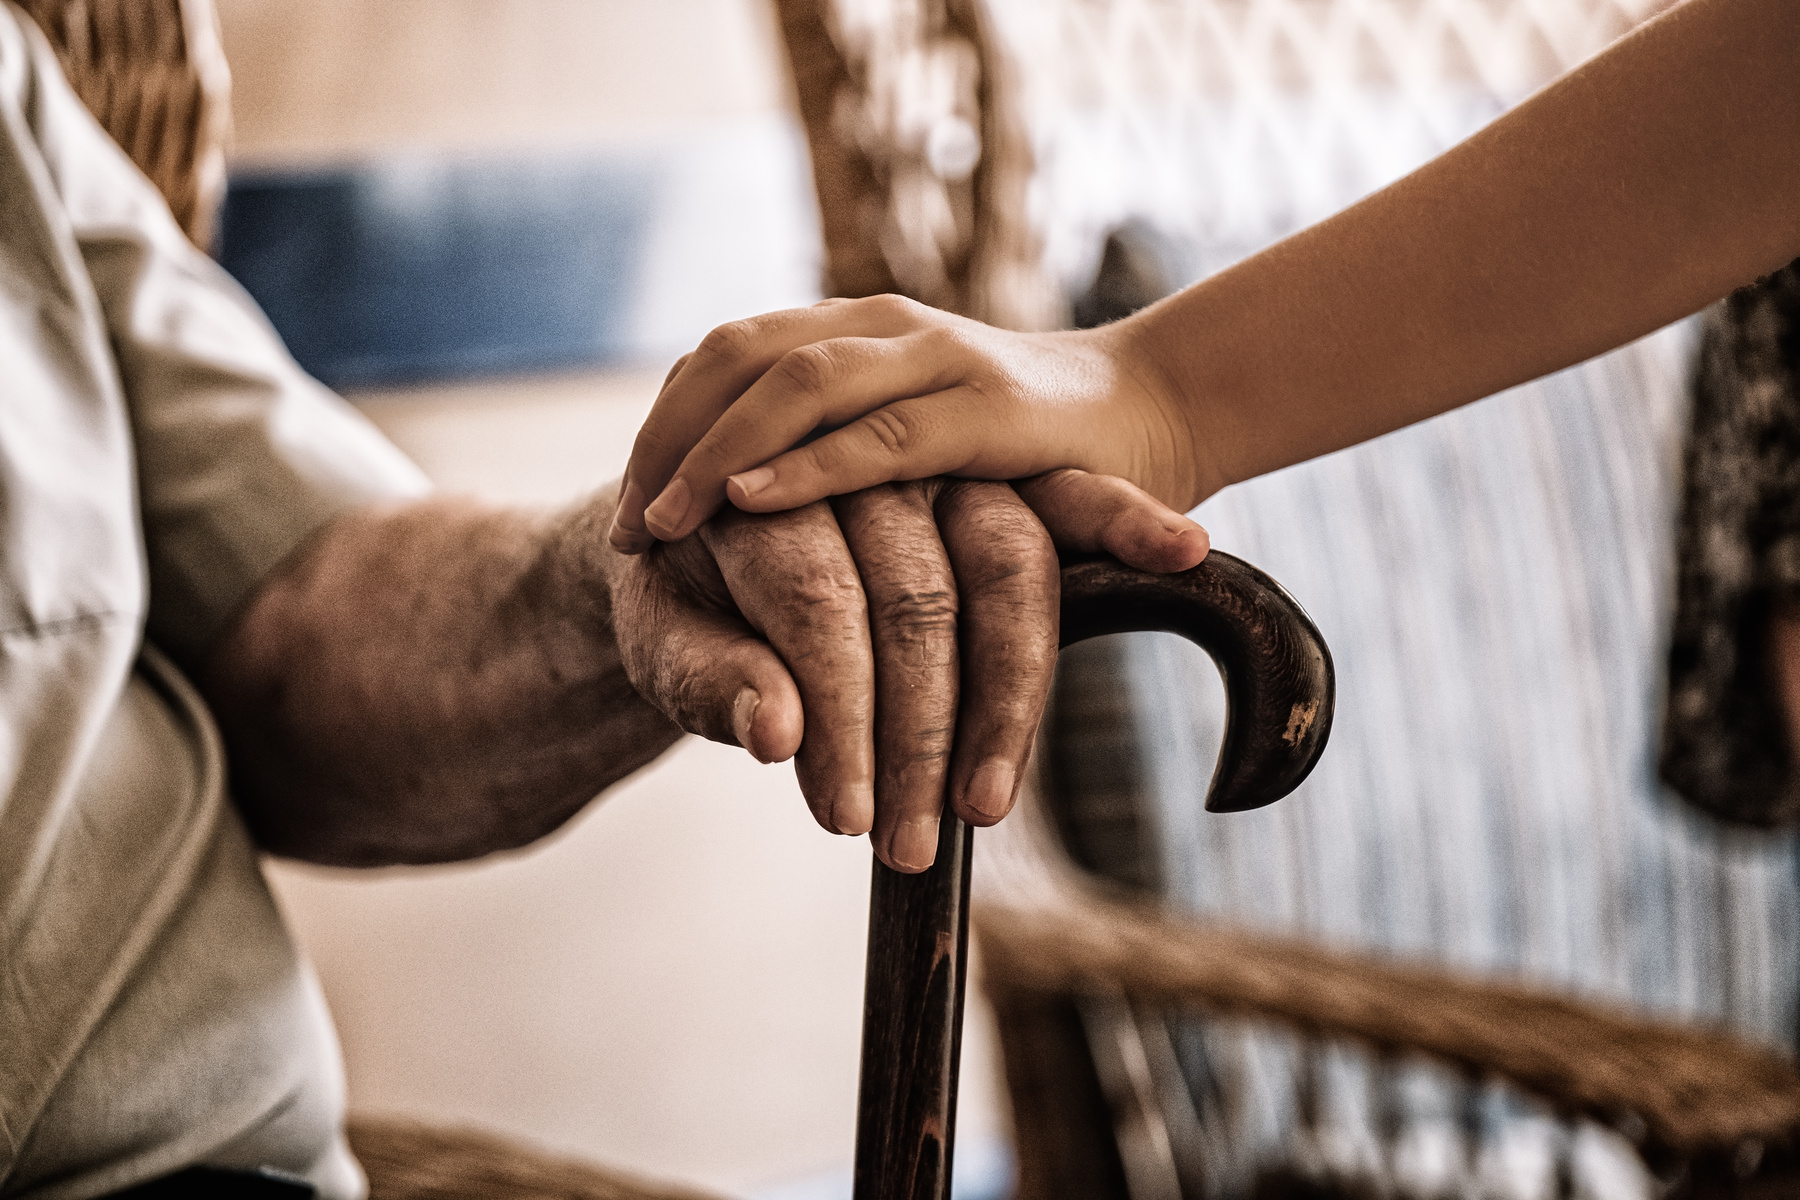 Child's Hand over an Elderly Man's Hand Holding a Cane